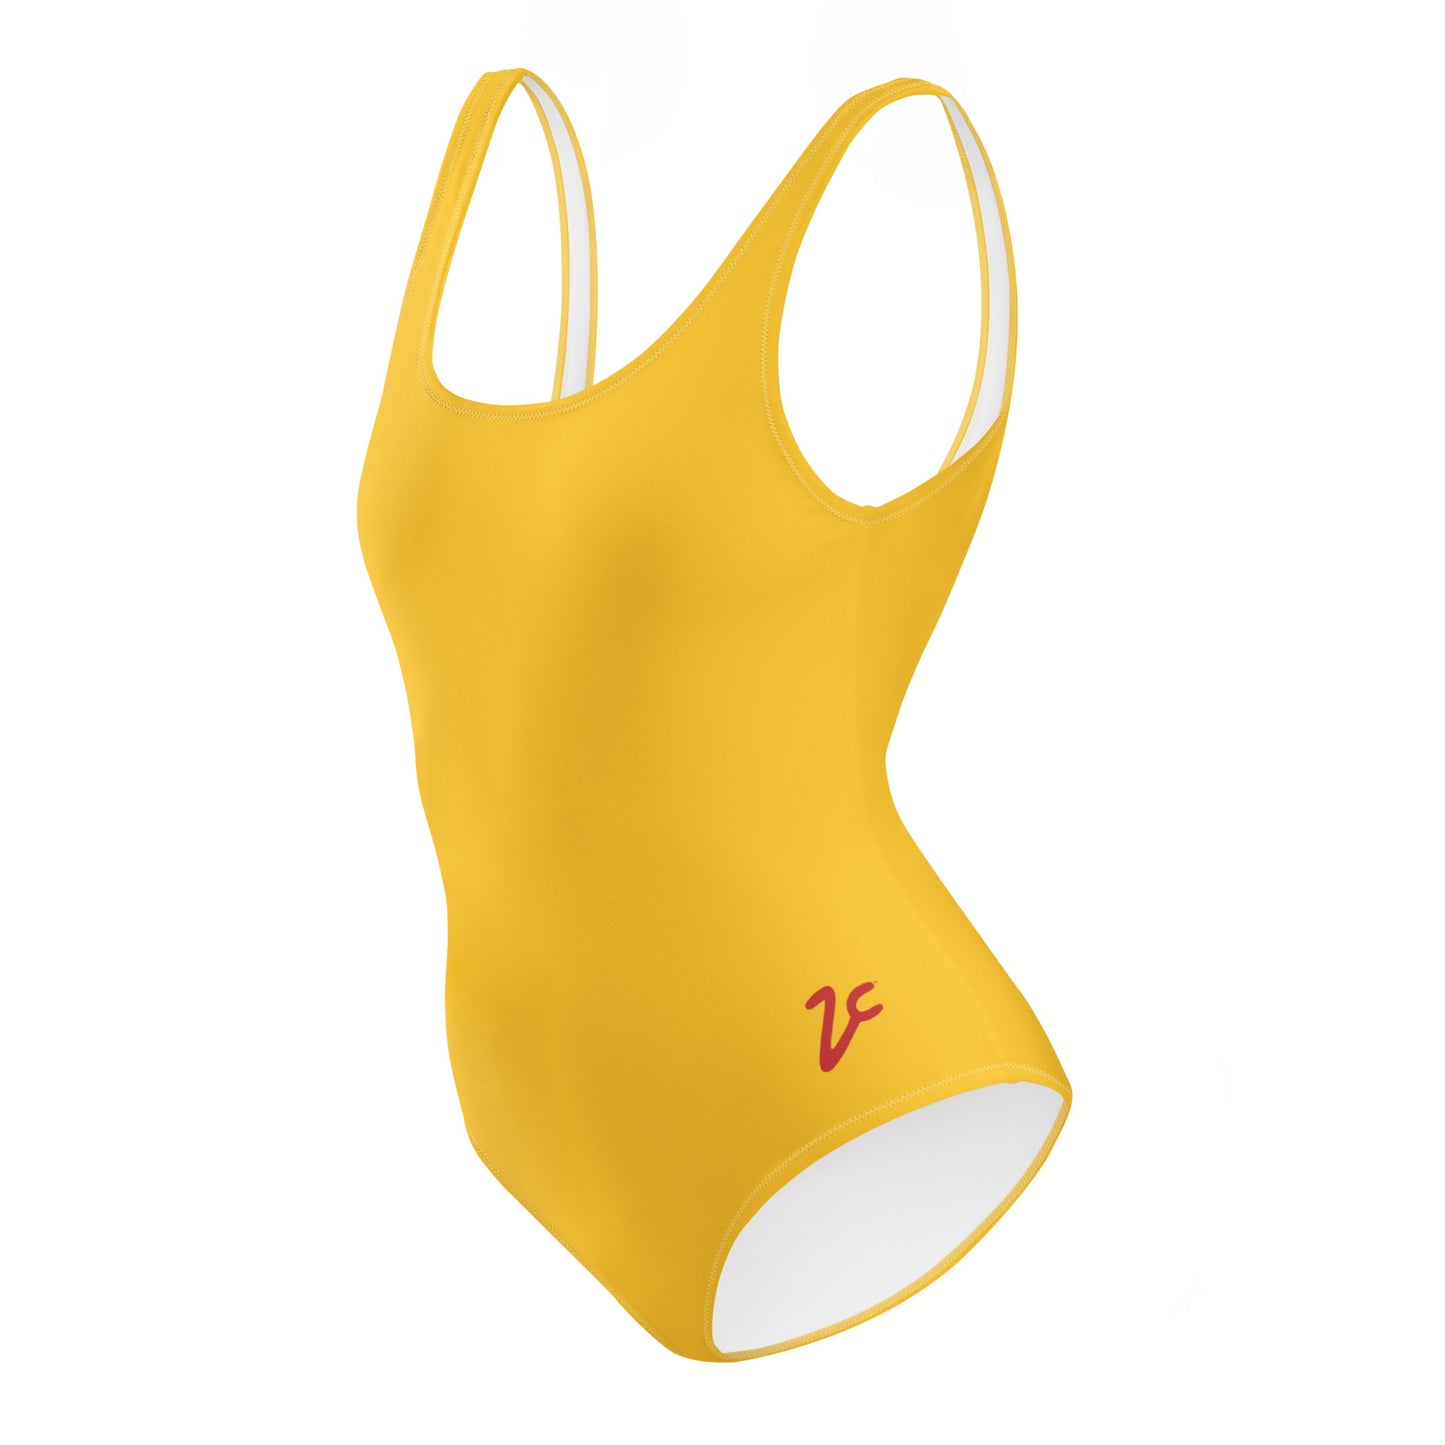 Canary Yellow One-Piece Swimsuit